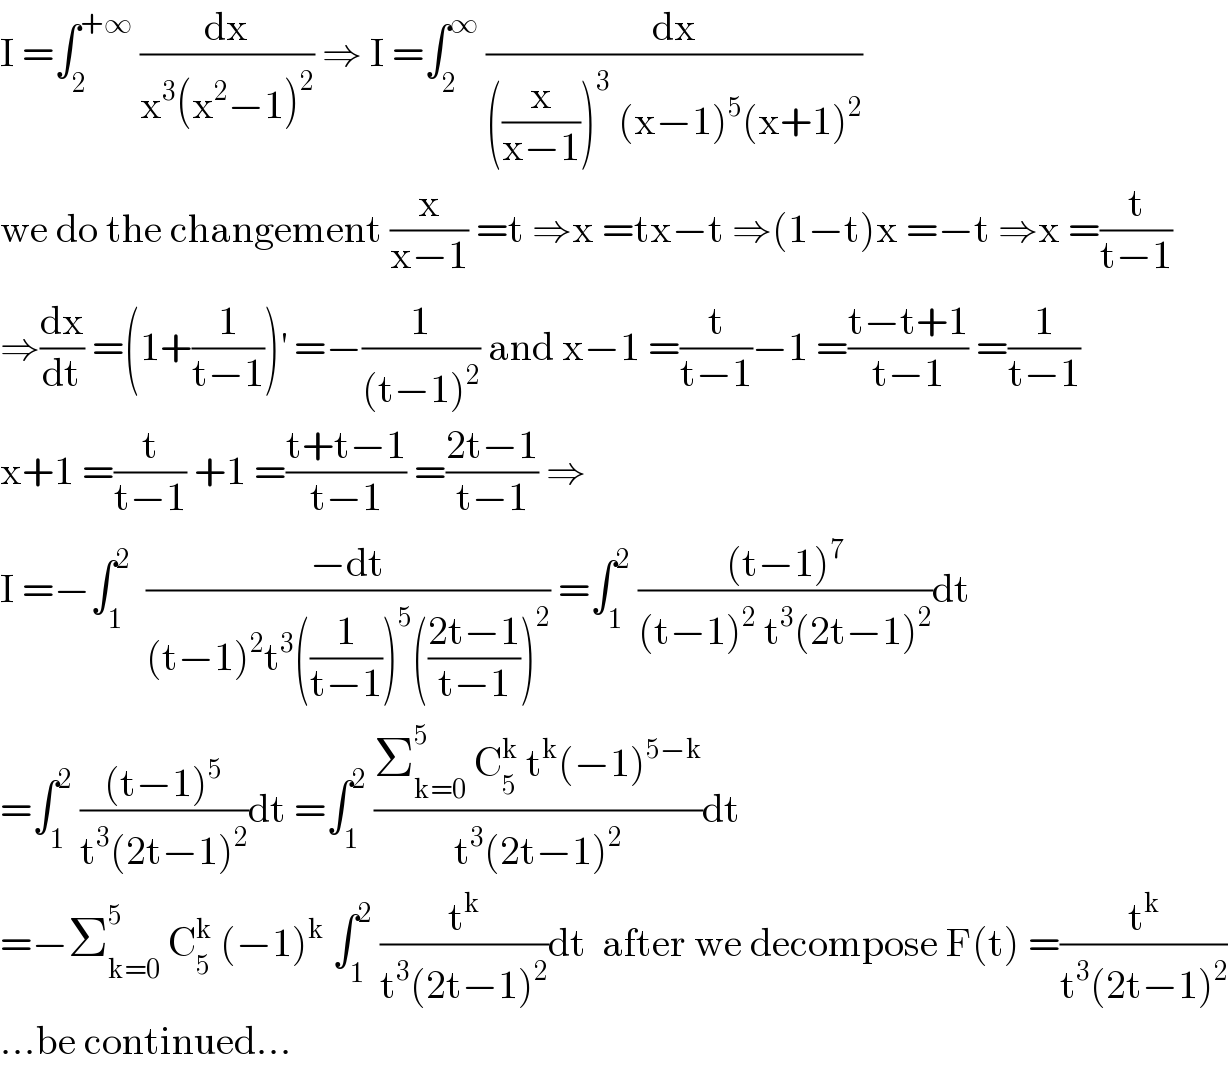 I =∫_2 ^(+∞)  (dx/(x^3 (x^2 −1)^2 )) ⇒ I =∫_2 ^∞  (dx/(((x/(x−1)))^3  (x−1)^5 (x+1)^2 ))  we do the changement (x/(x−1)) =t ⇒x =tx−t ⇒(1−t)x =−t ⇒x =(t/(t−1))  ⇒(dx/dt) =(1+(1/(t−1)))^′  =−(1/((t−1)^2 )) and x−1 =(t/(t−1))−1 =((t−t+1)/(t−1)) =(1/(t−1))  x+1 =(t/(t−1)) +1 =((t+t−1)/(t−1)) =((2t−1)/(t−1)) ⇒  I =−∫_1 ^2   ((−dt)/((t−1)^2 t^3 ((1/(t−1)))^5 (((2t−1)/(t−1)))^2 )) =∫_1 ^2  (((t−1)^7 )/((t−1)^2  t^3 (2t−1)^2 ))dt  =∫_1 ^2  (((t−1)^5 )/(t^3 (2t−1)^2 ))dt =∫_1 ^2  ((Σ_(k=0) ^5  C_5 ^k  t^k (−1)^(5−k) )/(t^3 (2t−1)^2 ))dt  =−Σ_(k=0) ^5  C_5 ^k  (−1)^k  ∫_1 ^2  (t^k /(t^3 (2t−1)^2 ))dt  after we decompose F(t) =(t^k /(t^3 (2t−1)^2 ))  ...be continued...  